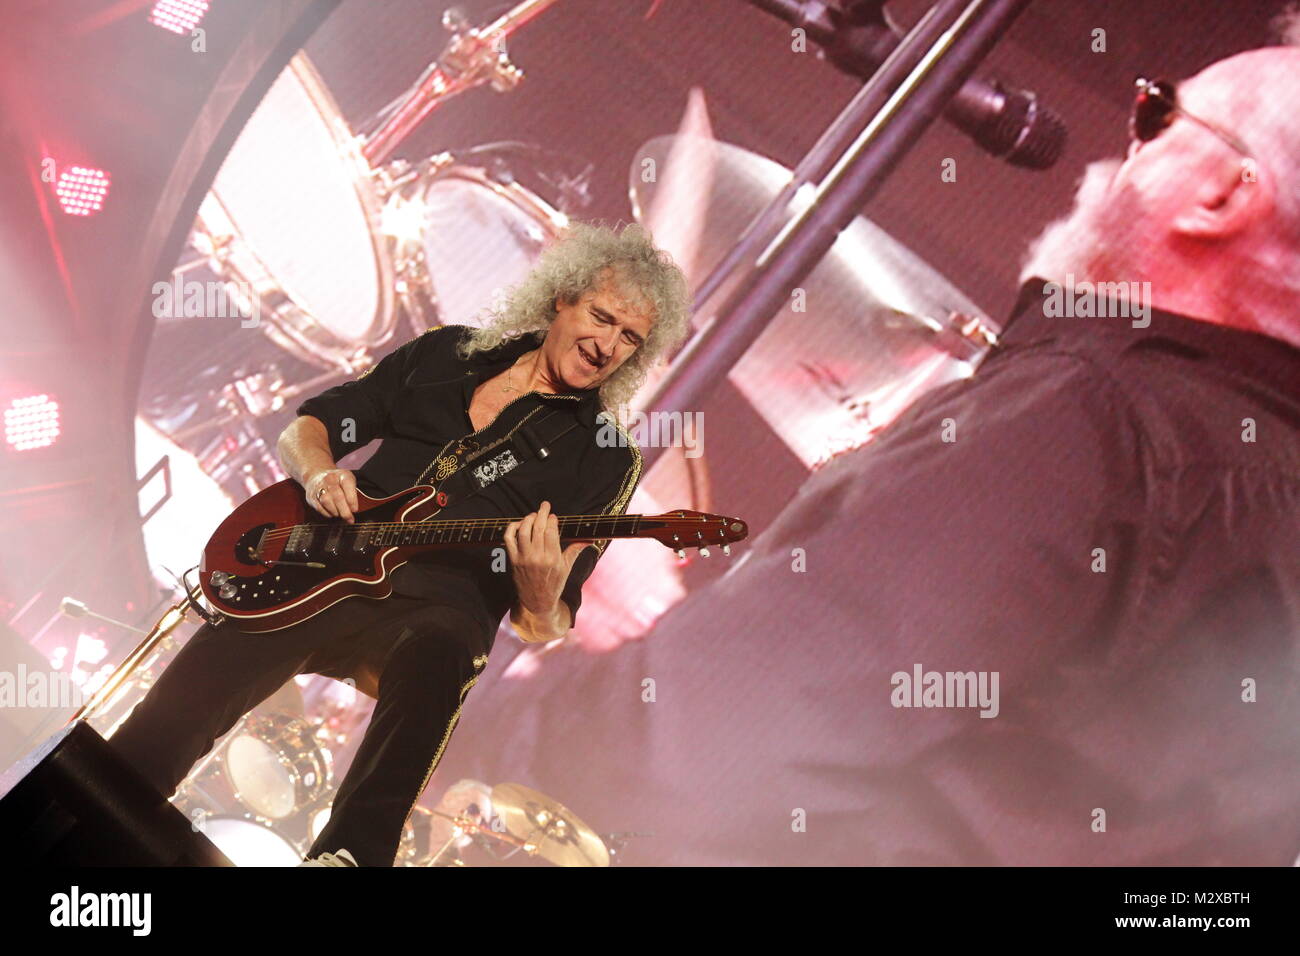 Frankfurt, Germany. 7th Feb, 2015. Queen + Adam Lambert, collaboration between the active members of the British rock band Queen (Brian May and Roger Taylor) and American vocalist Adam Lambert. Concert at Festhalle Frankfurt, Germany. Here: Brian May. Credit: Christian Lademann Stock Photo